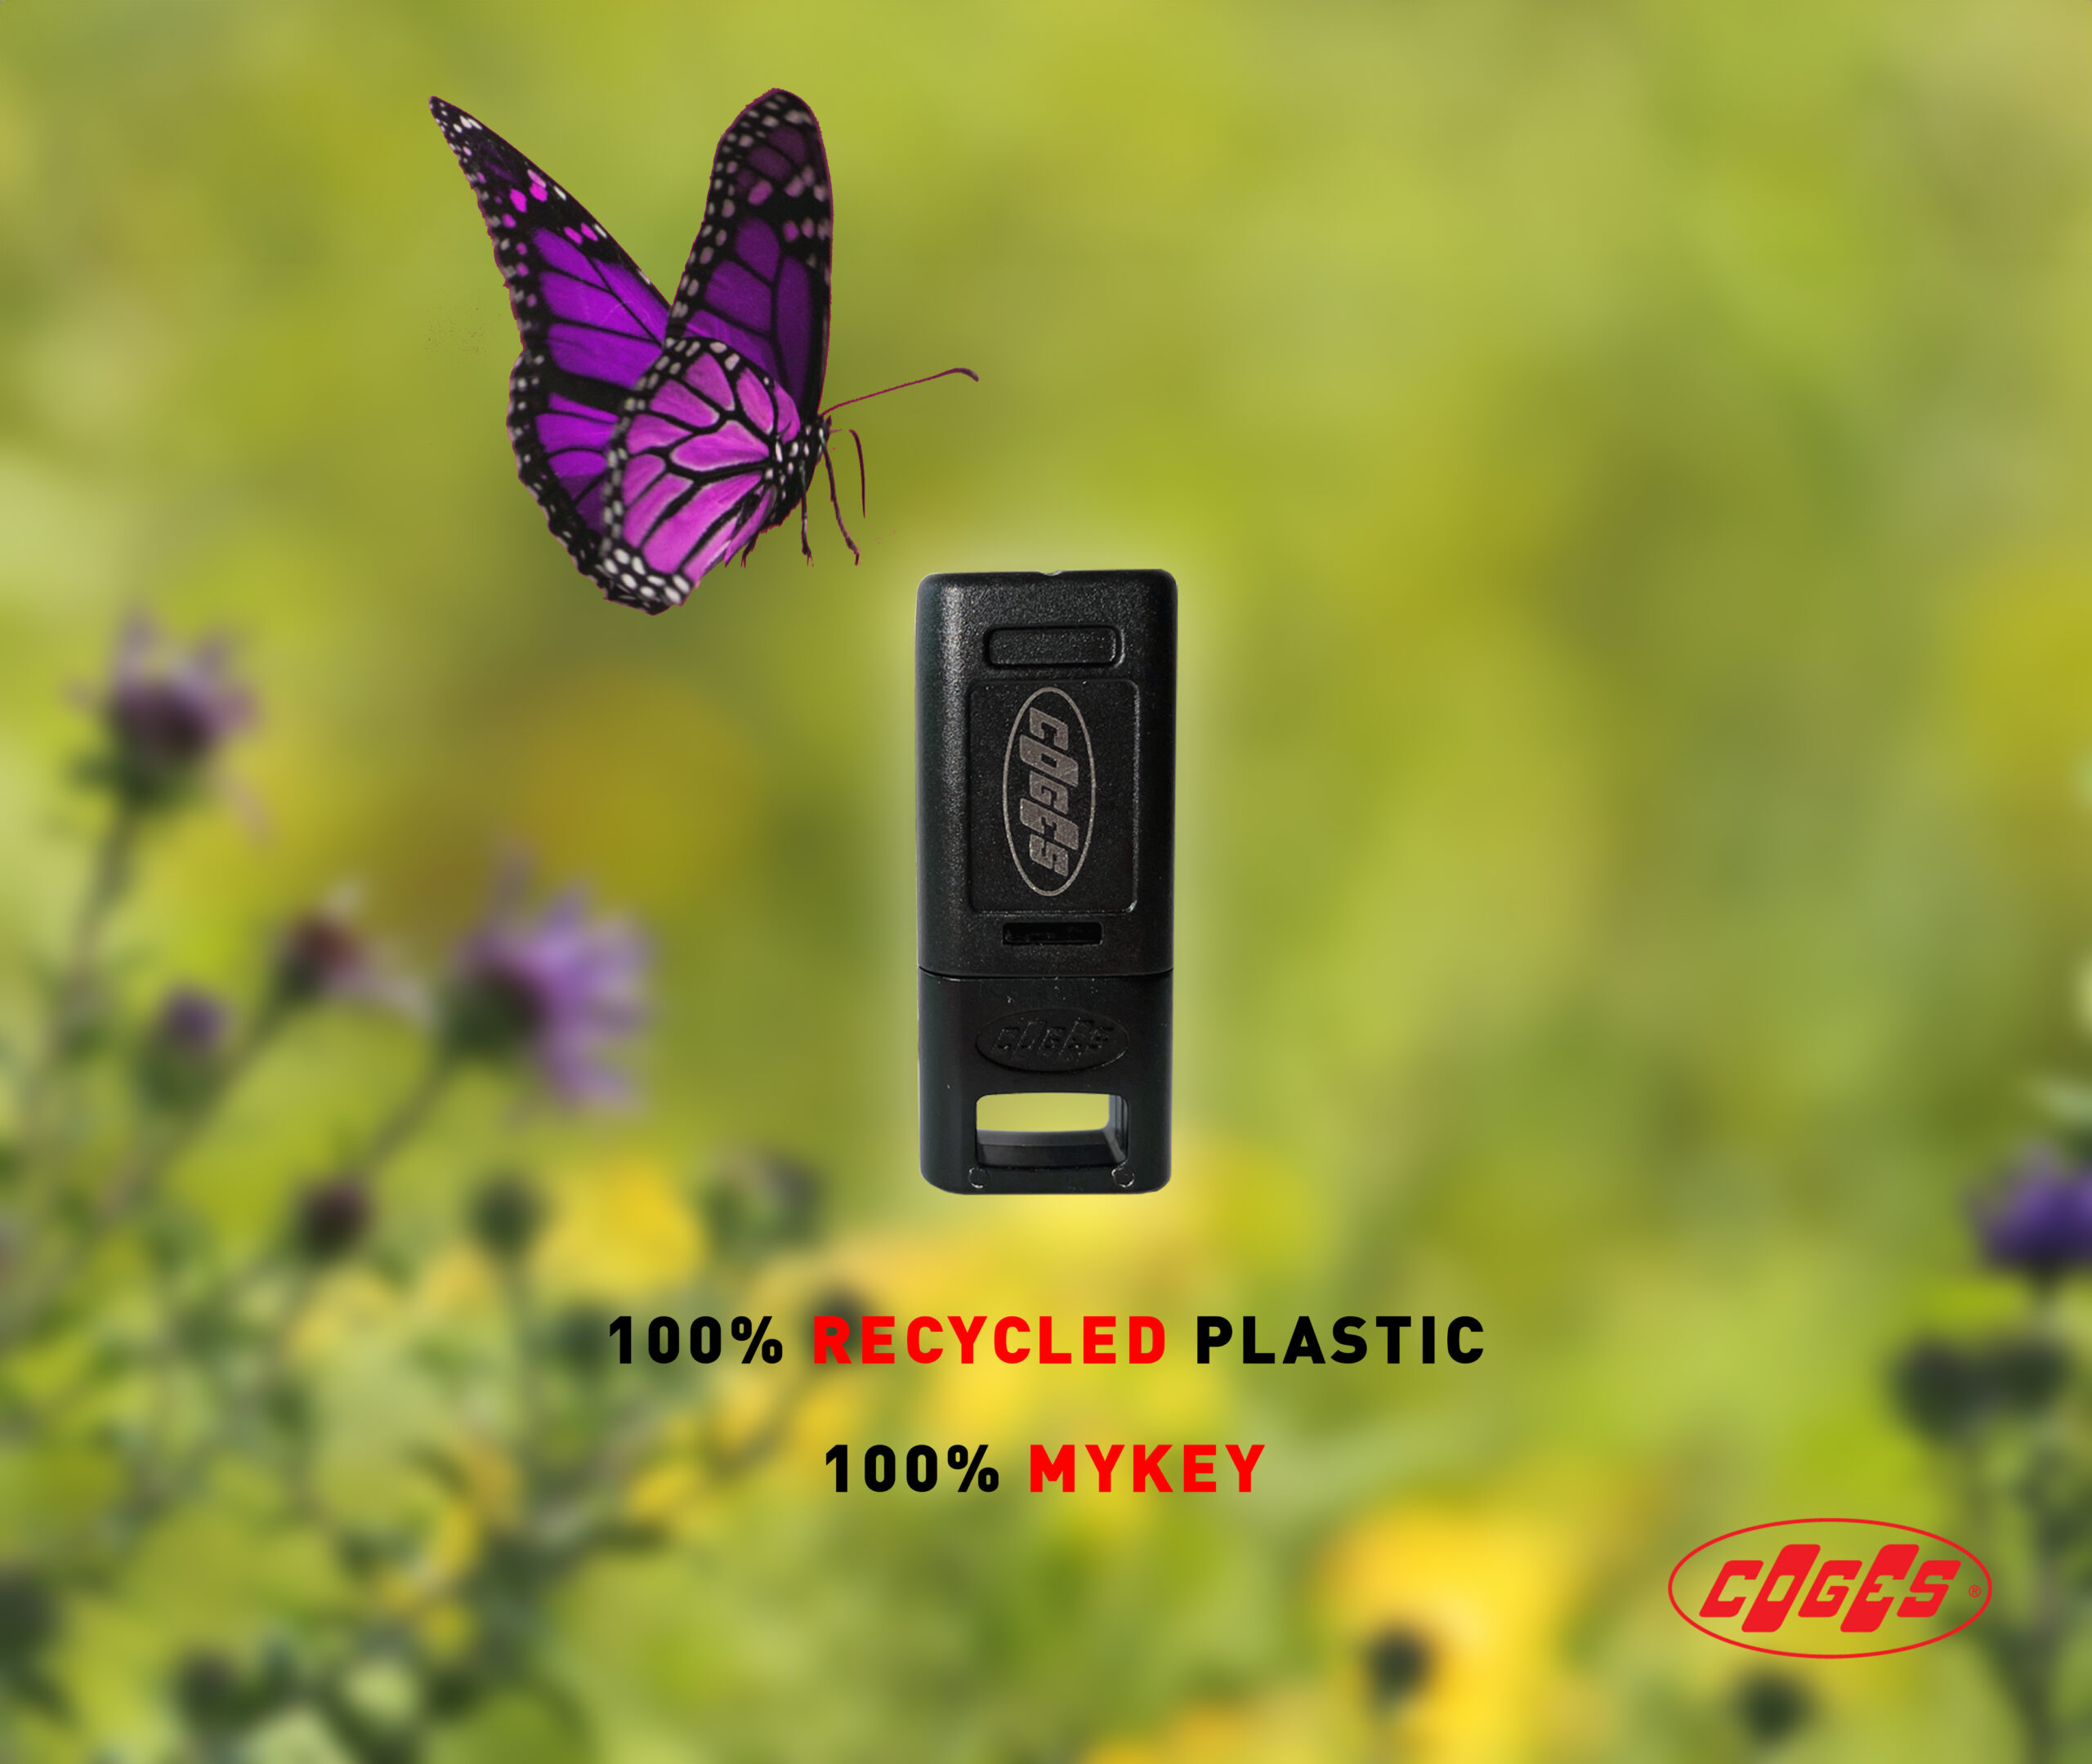 The new MyKey designed for those who love the environment